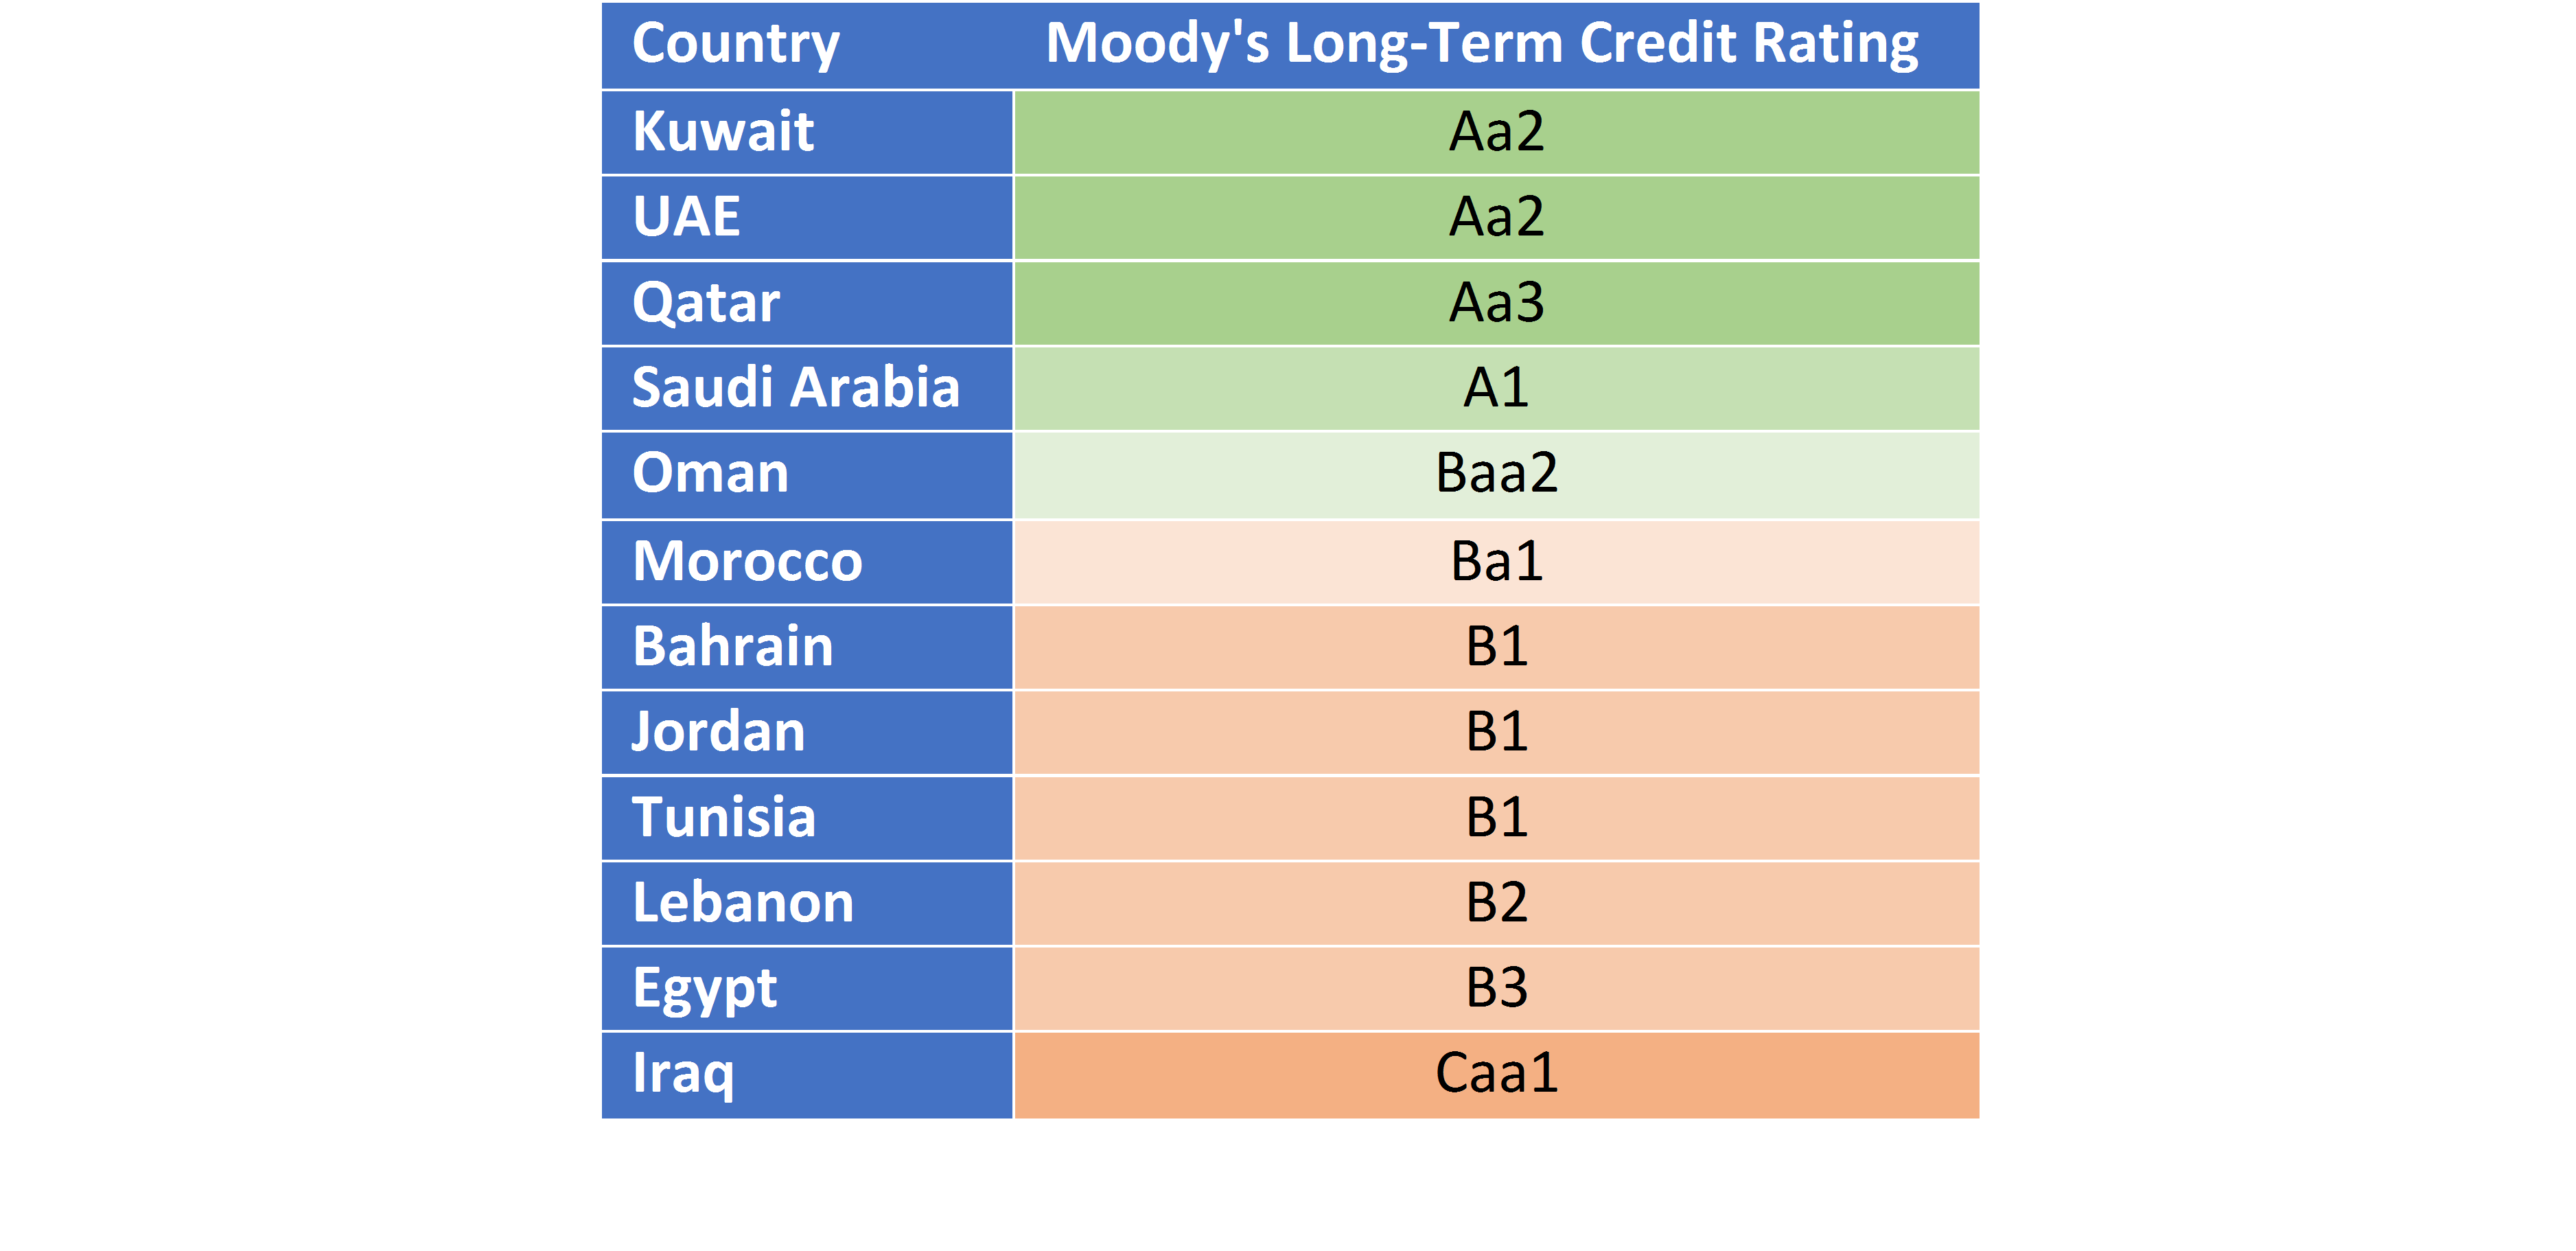 Comparison of Moody’s Rating for Arab Countries